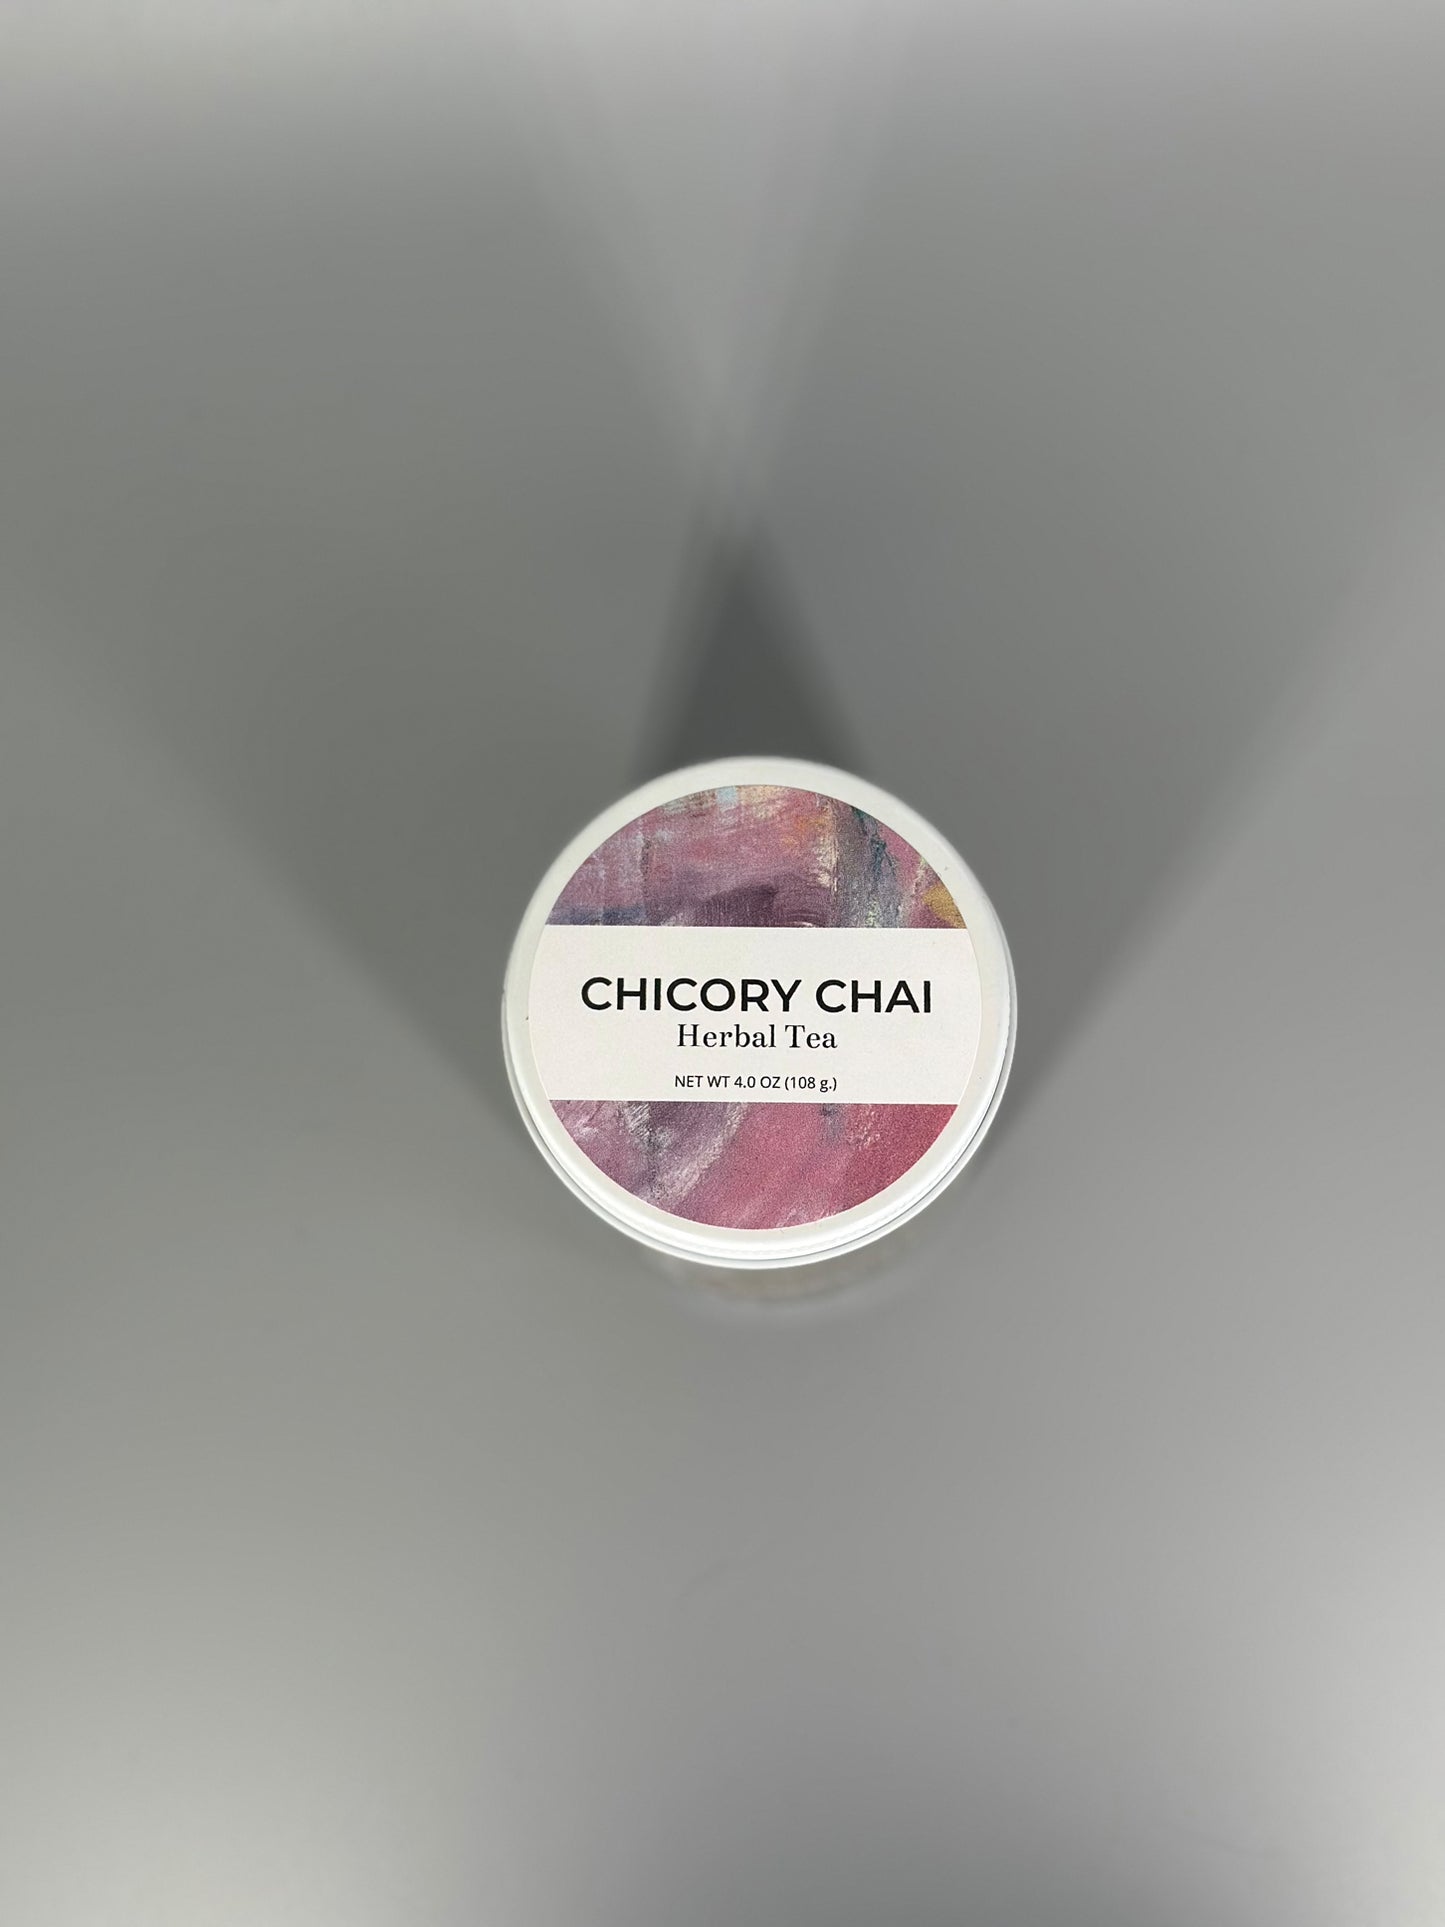 Chicory Tea Co.'s Chicory Chai Herbal Tea in the jar, view from the top